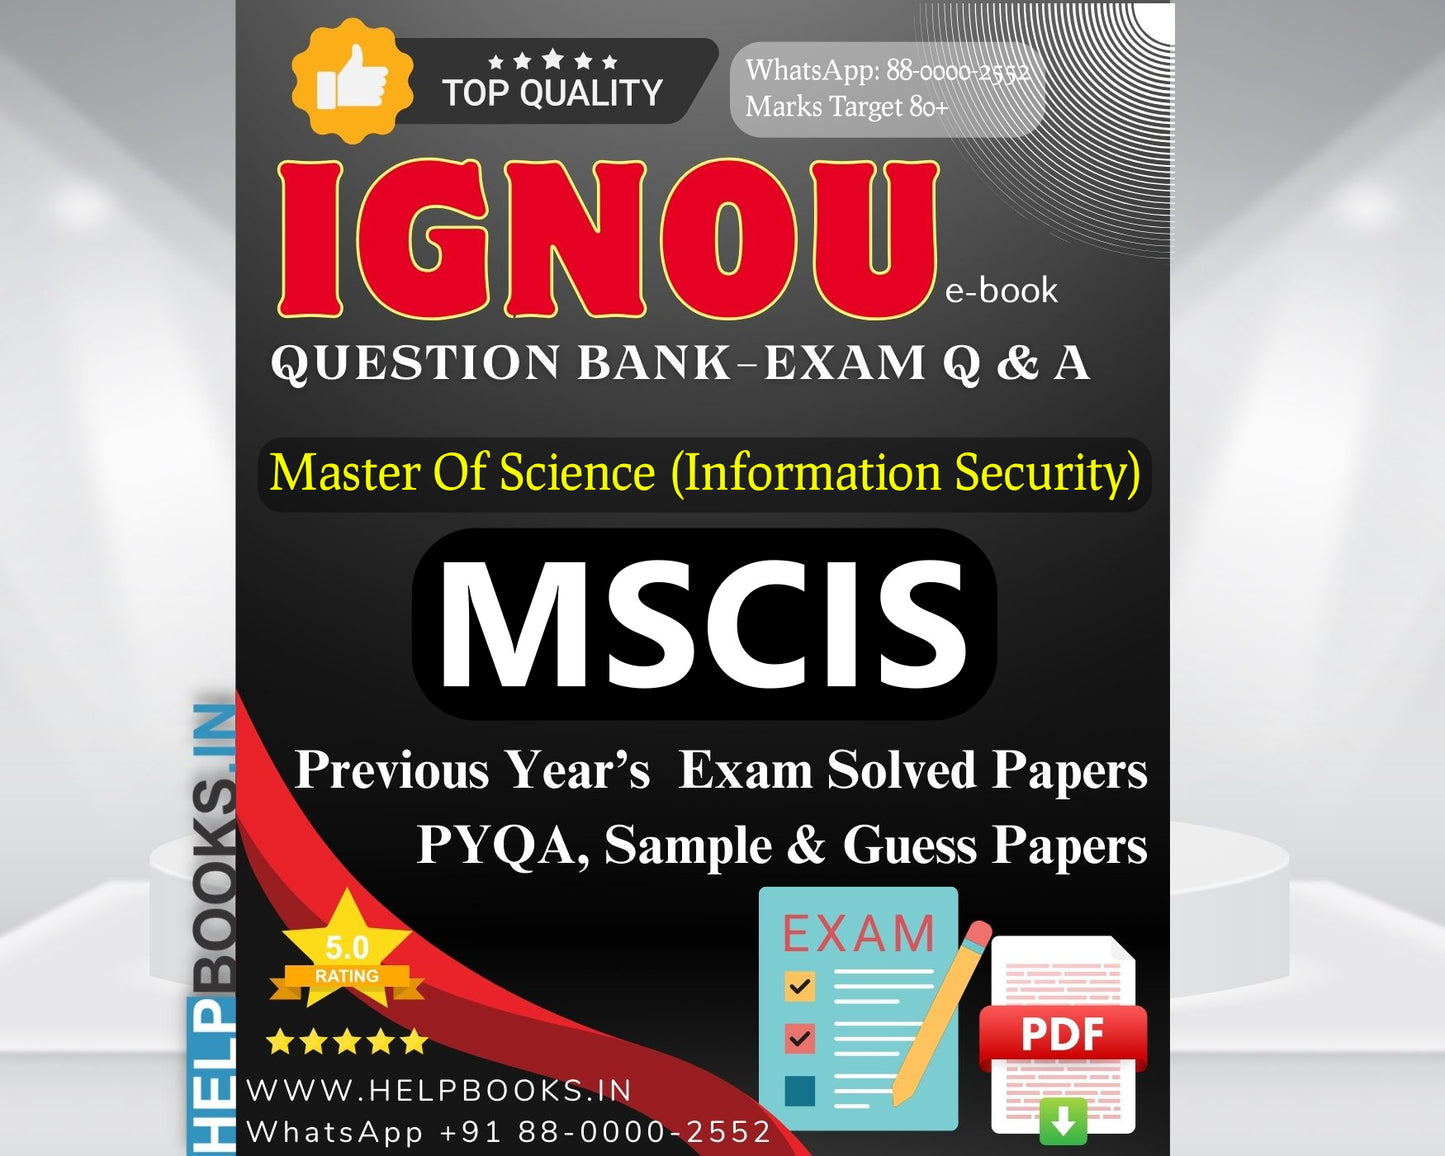 MSCIS IGNOU Exam Combo of 10 Solved Papers: 5 Previous Years' Solved Papers & 5 Sample Guess Papers for Master of Science Information Security